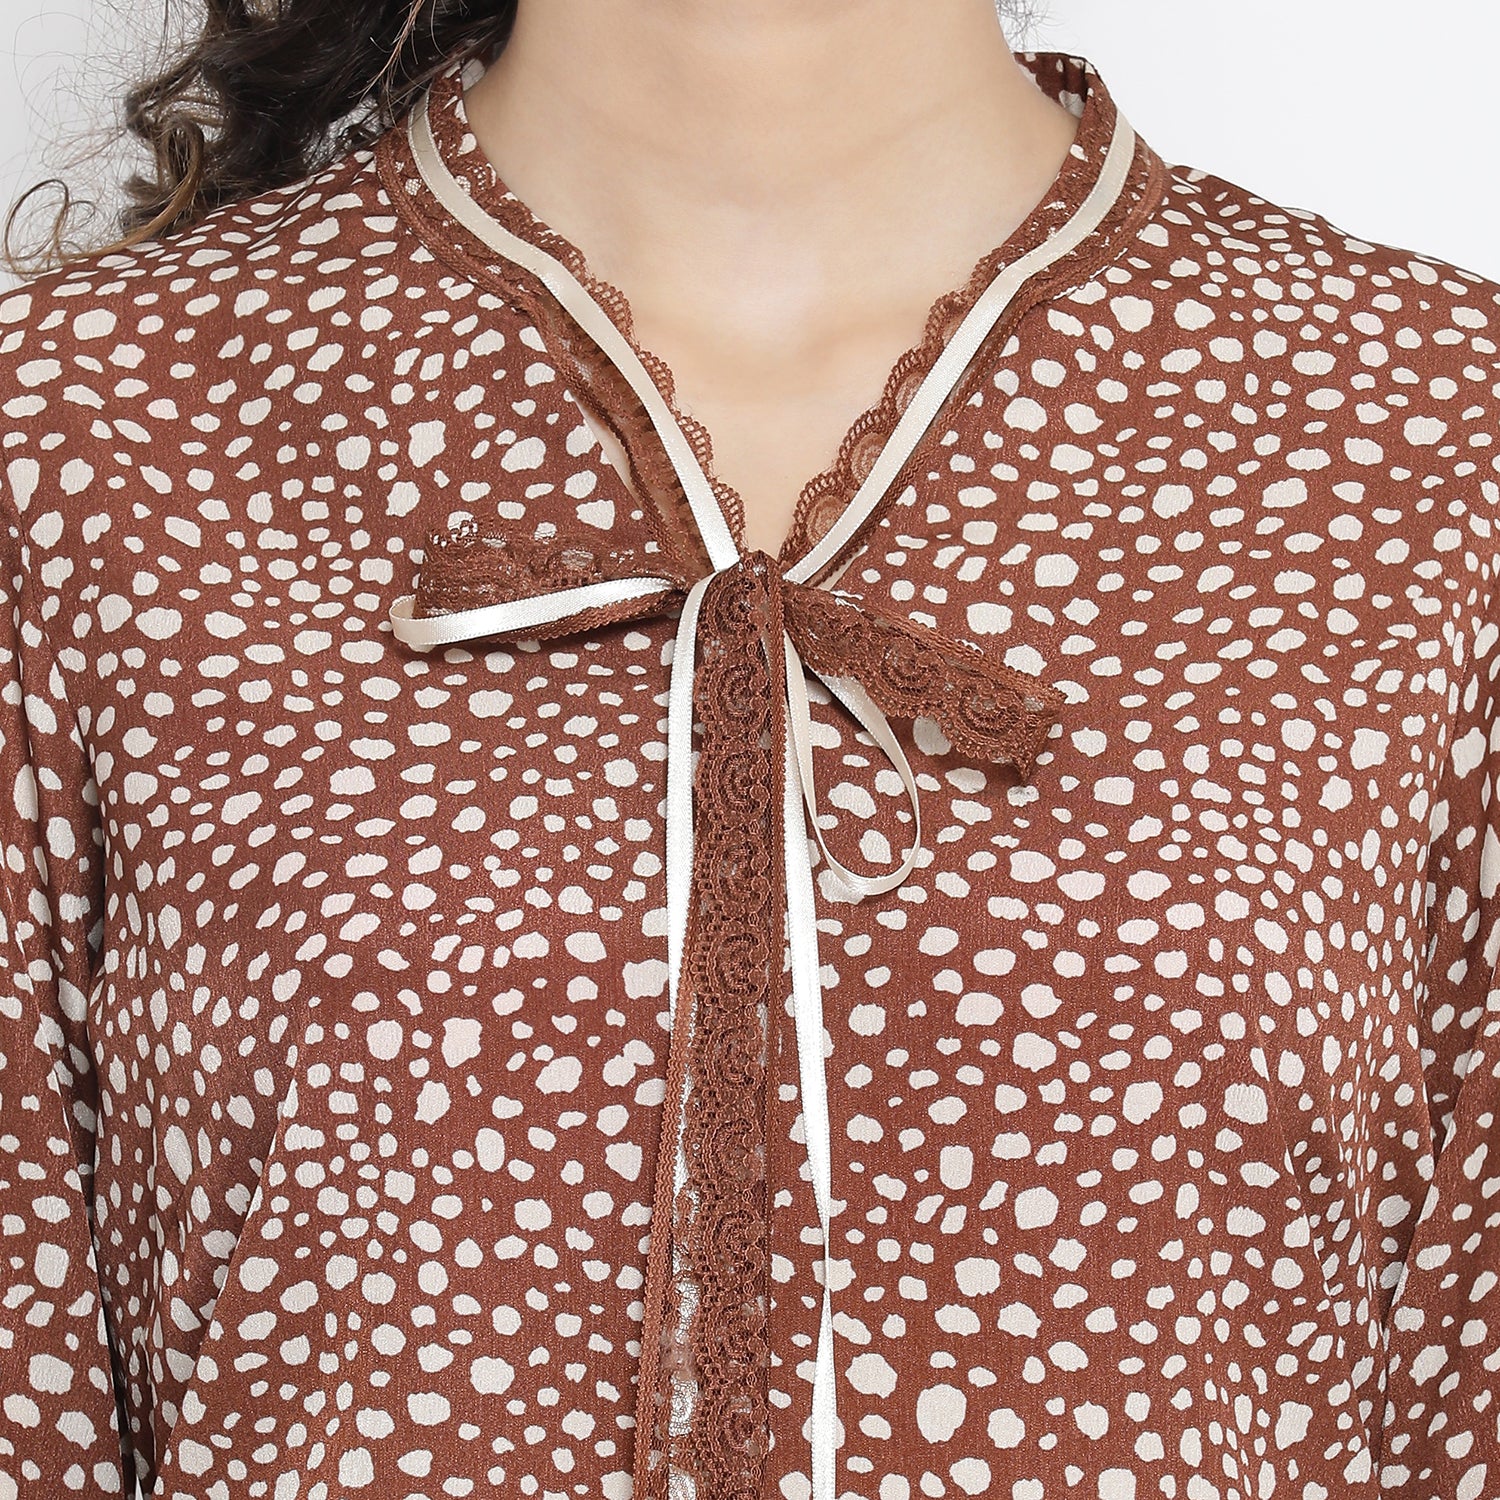 Brown Animal Printed Shirt With French Lace And Ribbon Tie Up